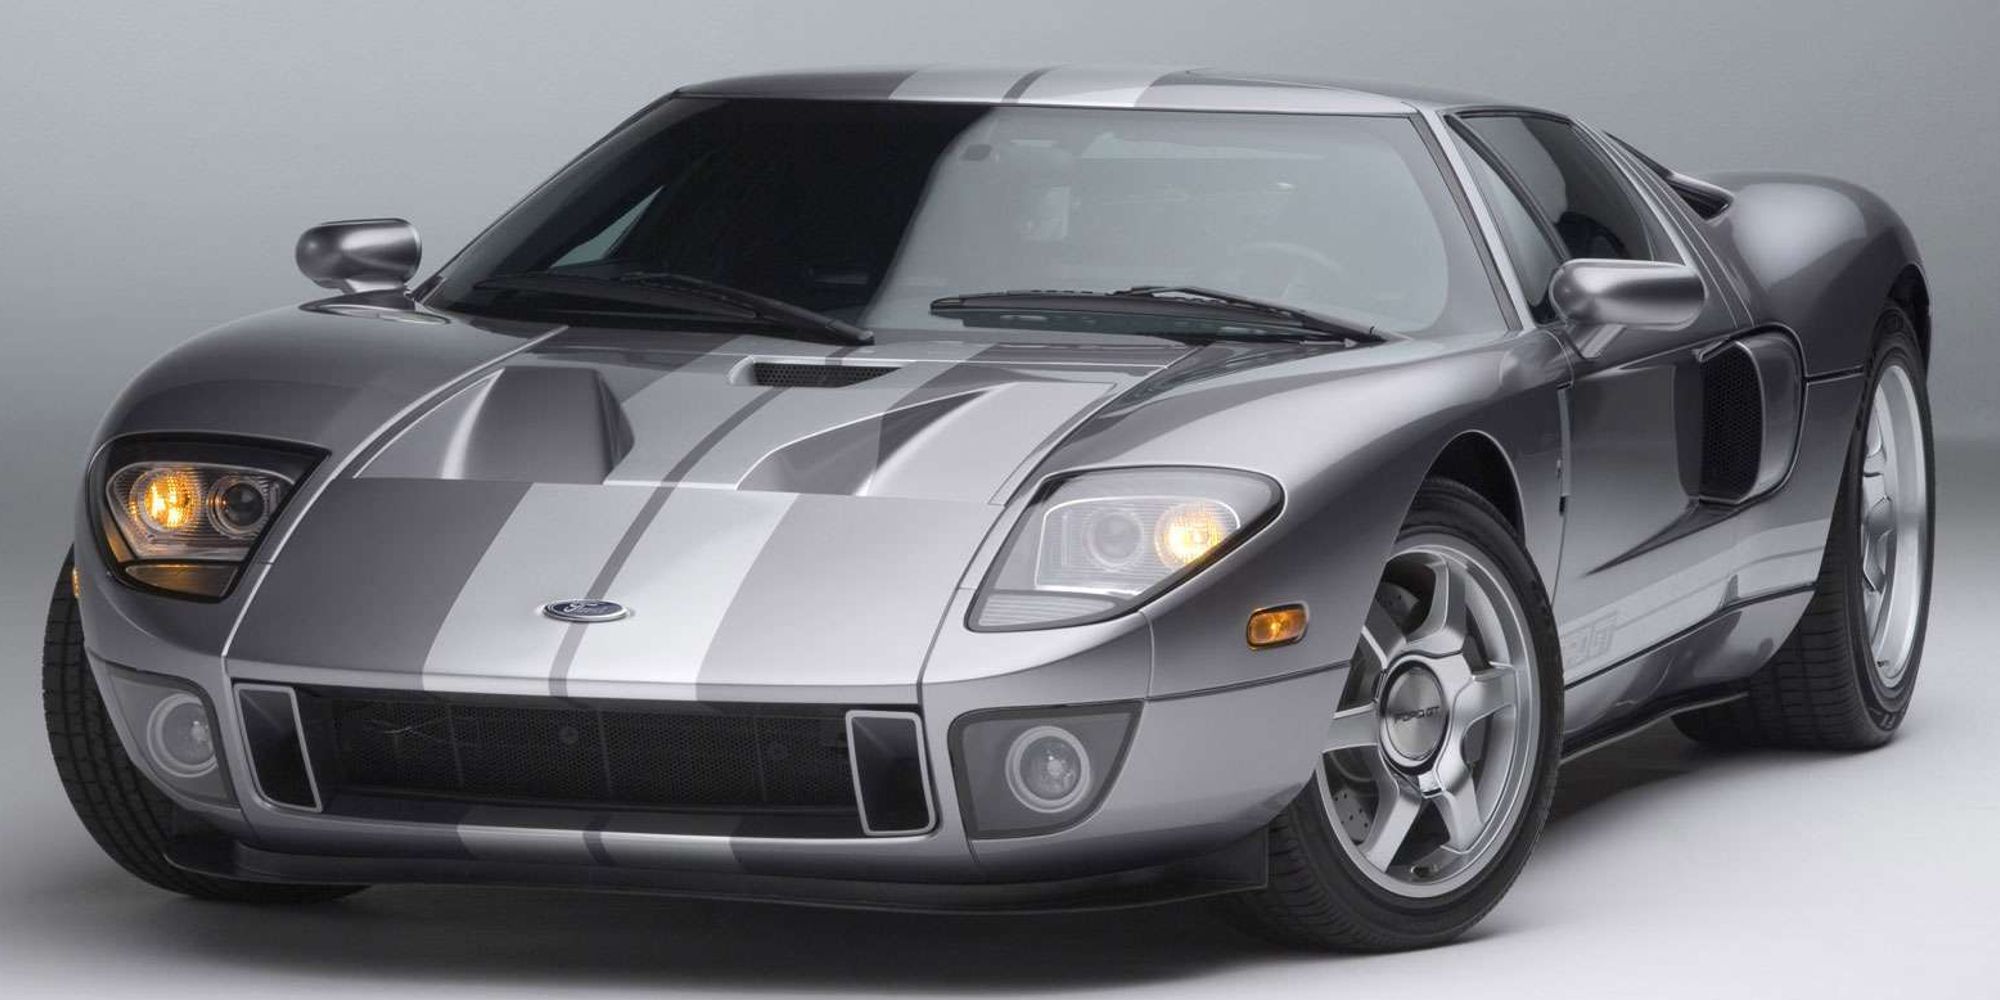 The front of the Ford GT